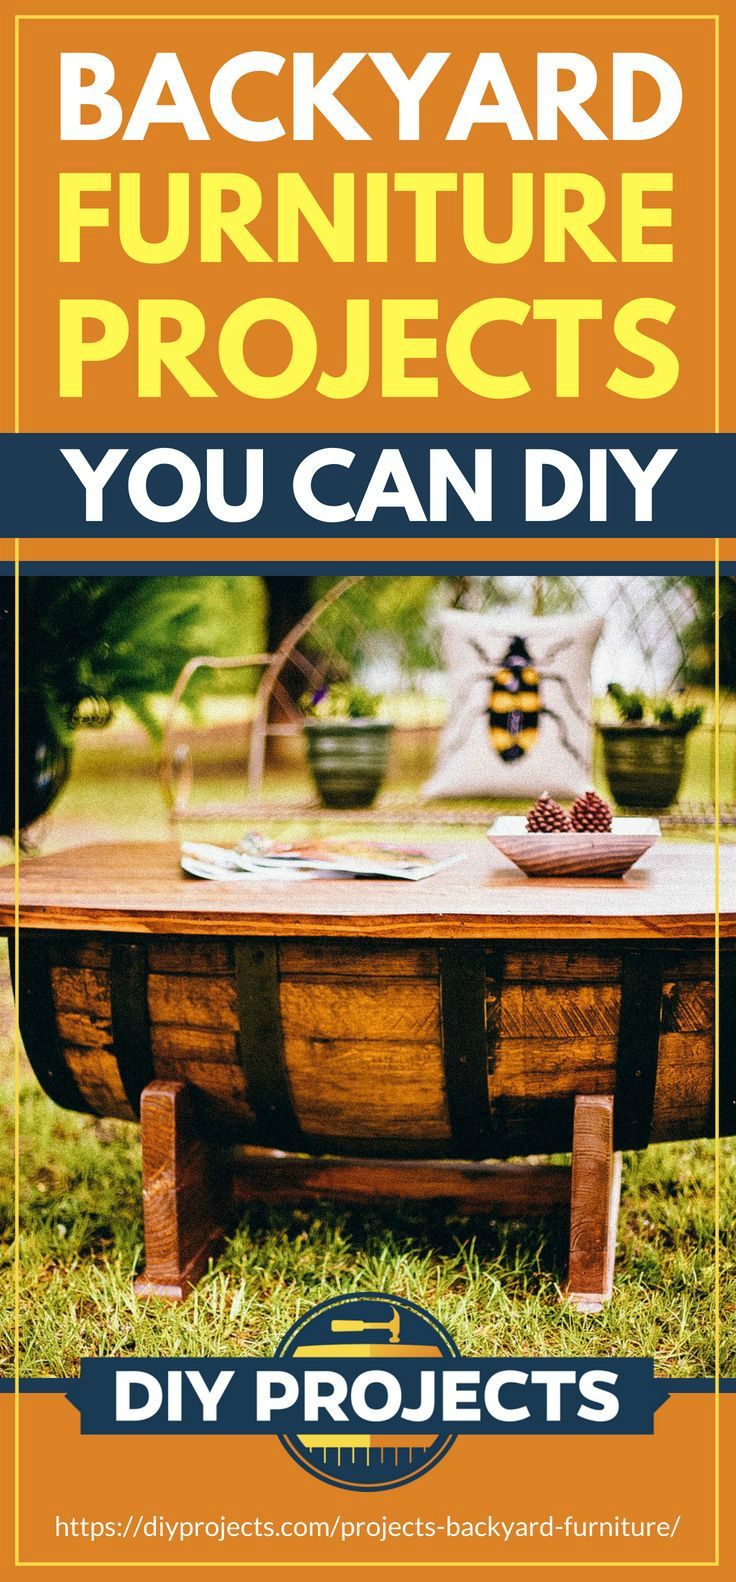 Placard | Backyard Furniture Projects You Can DIY